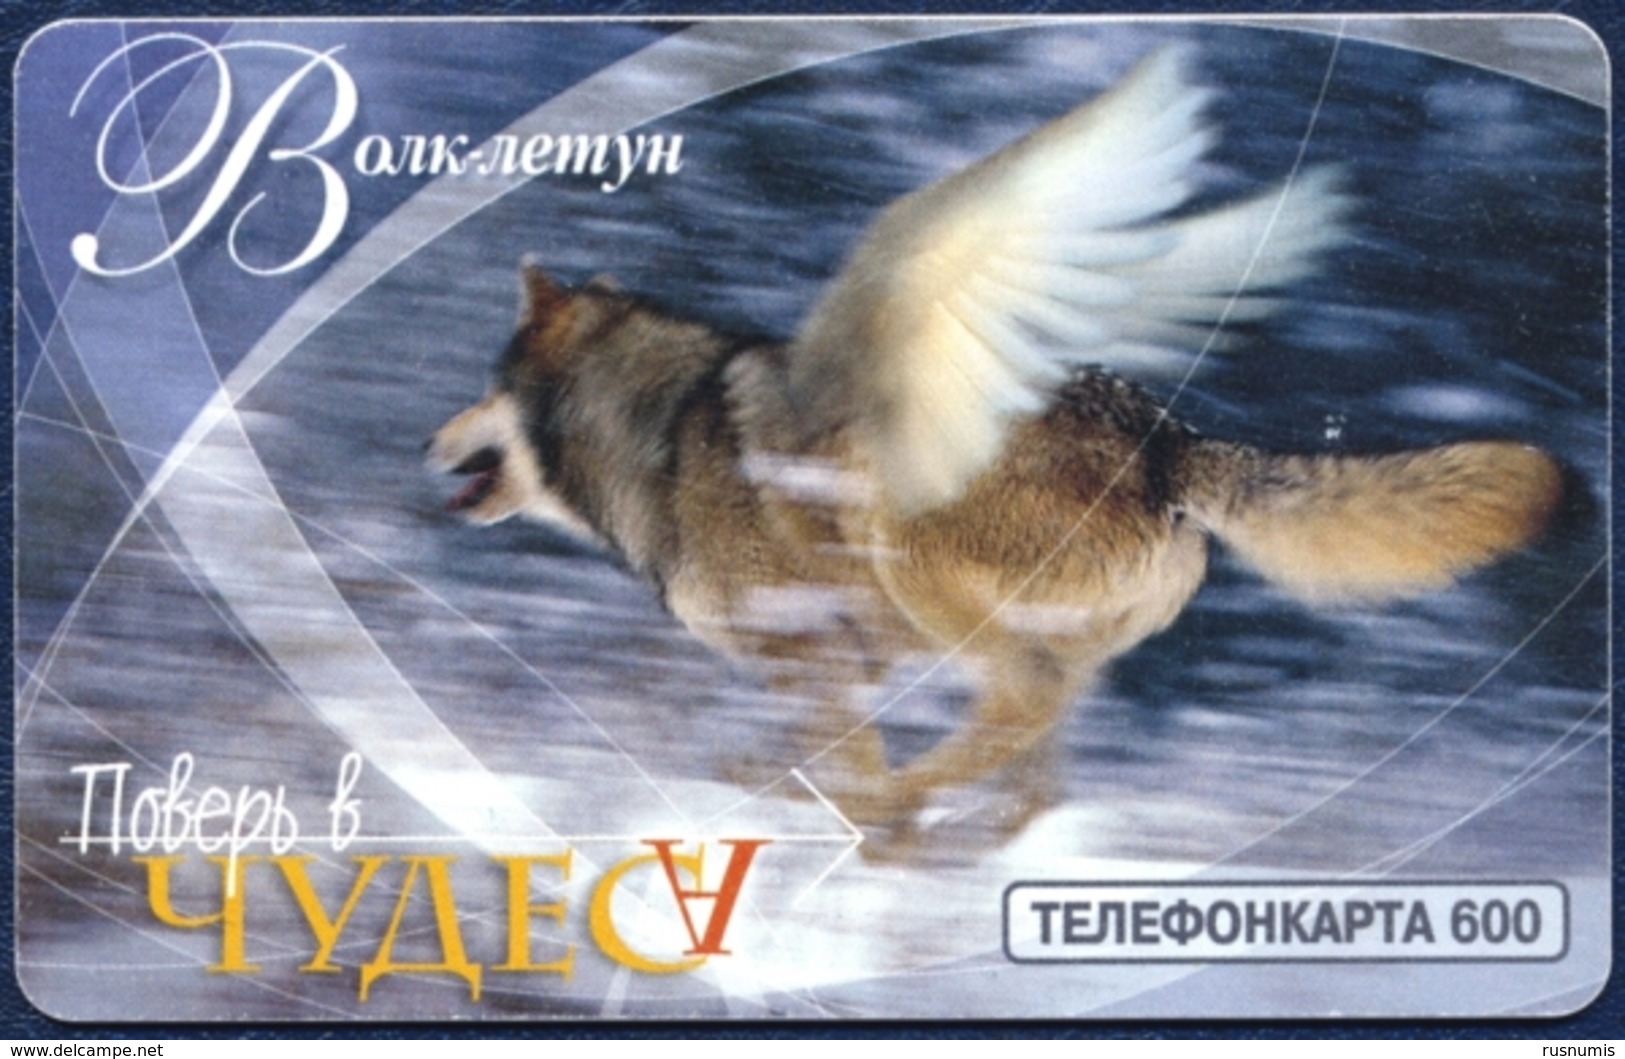 RUSSIA - RUSSIE - RUSSLAND MGTS 600 UNITS CHIP TELECARTE BELIVE IN MIRACLES MYTHICAL ANIMALS FLYING WOLF QTY 25.000 - Russland